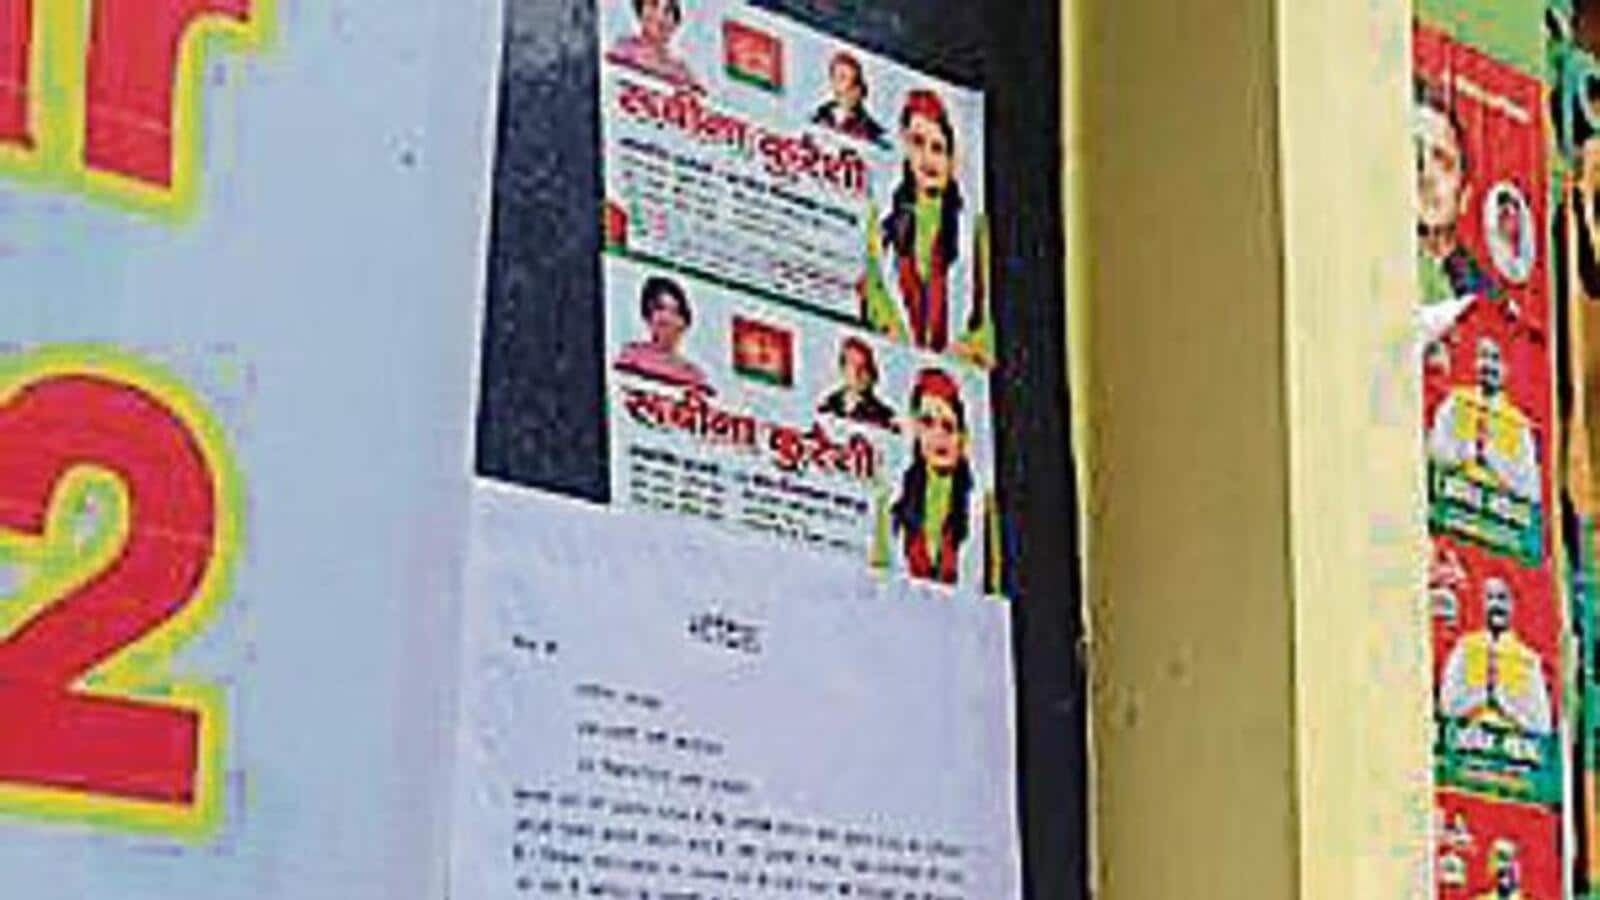 UP polls: Police vigil outside party offices stepped up, notices pasted to ensure compliance with EC directives